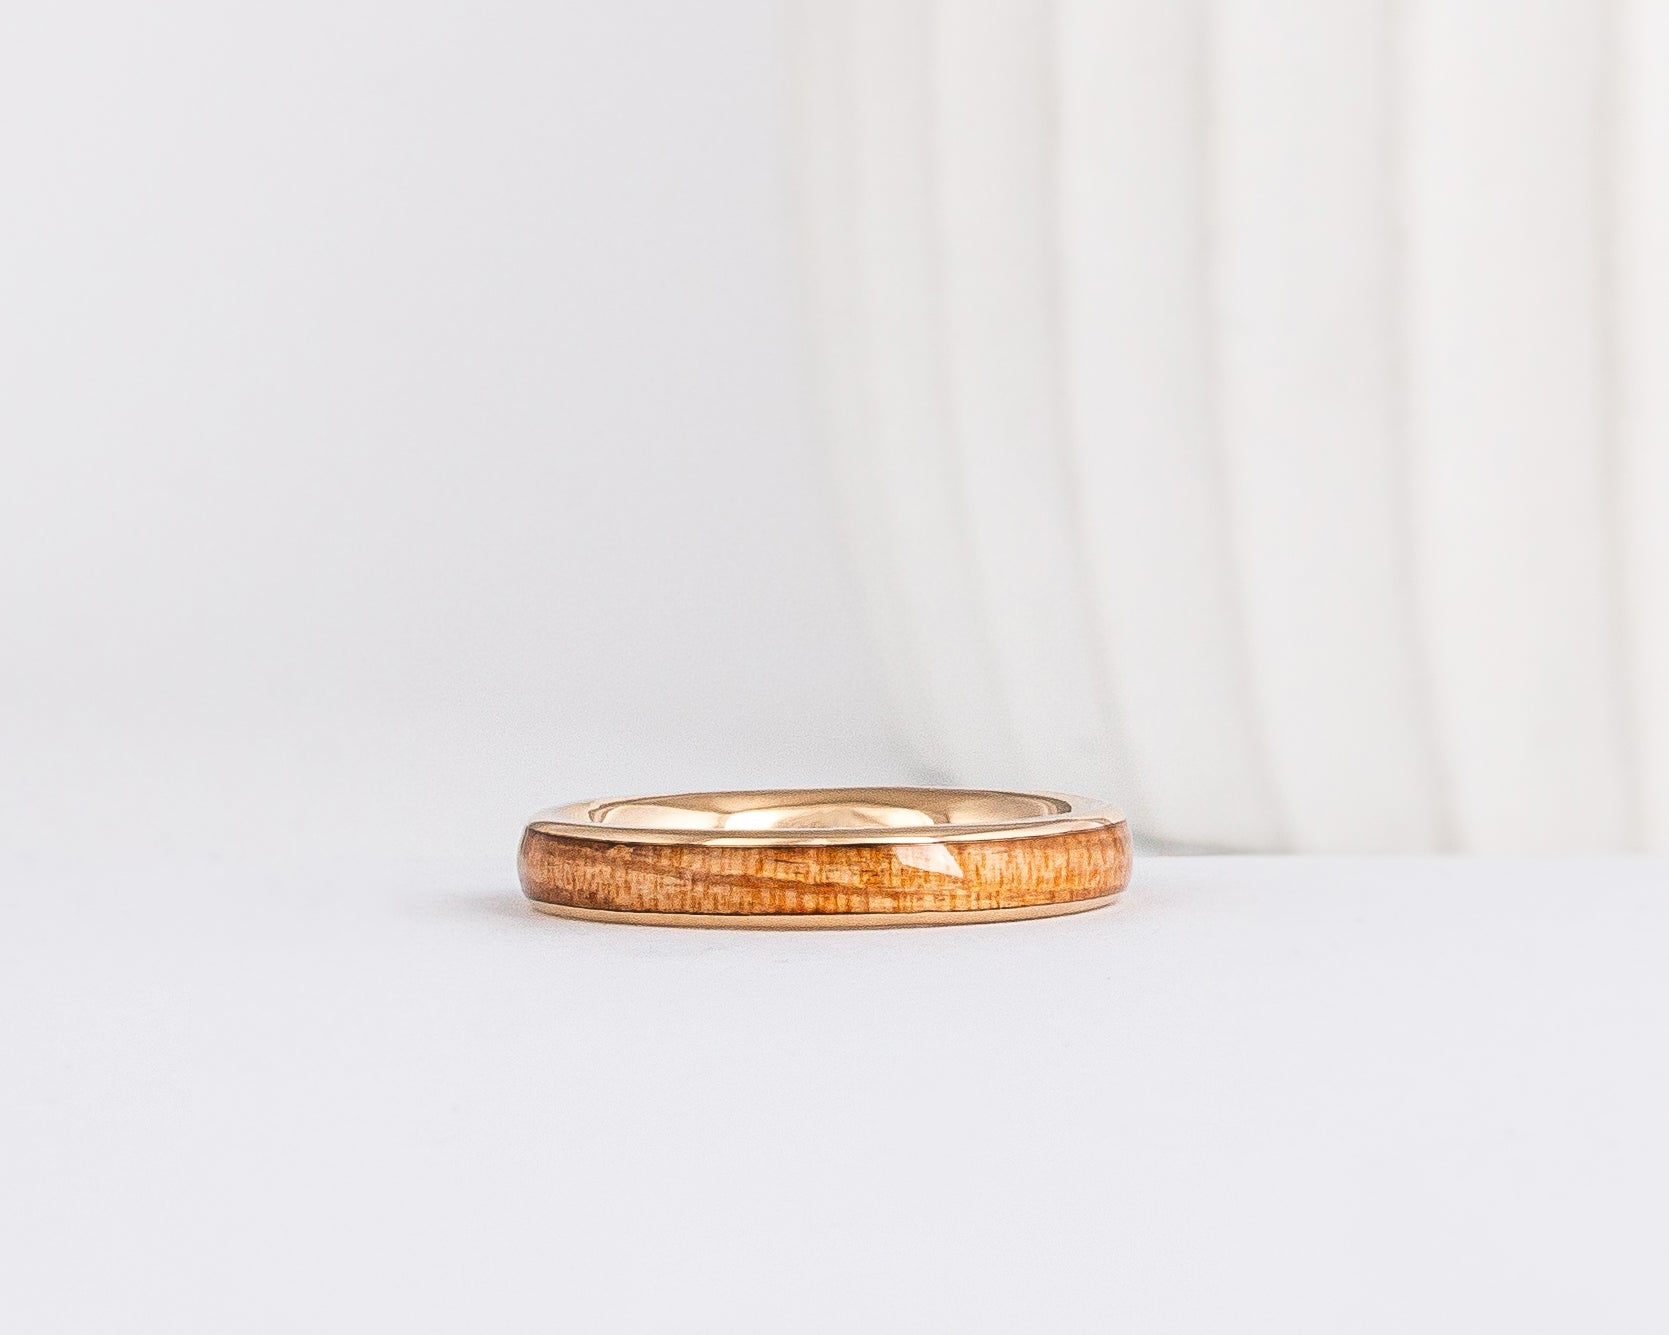 a slim, rounded yellow gold wedding band with a center inlay of american elm wood, giving it a tone on tone look